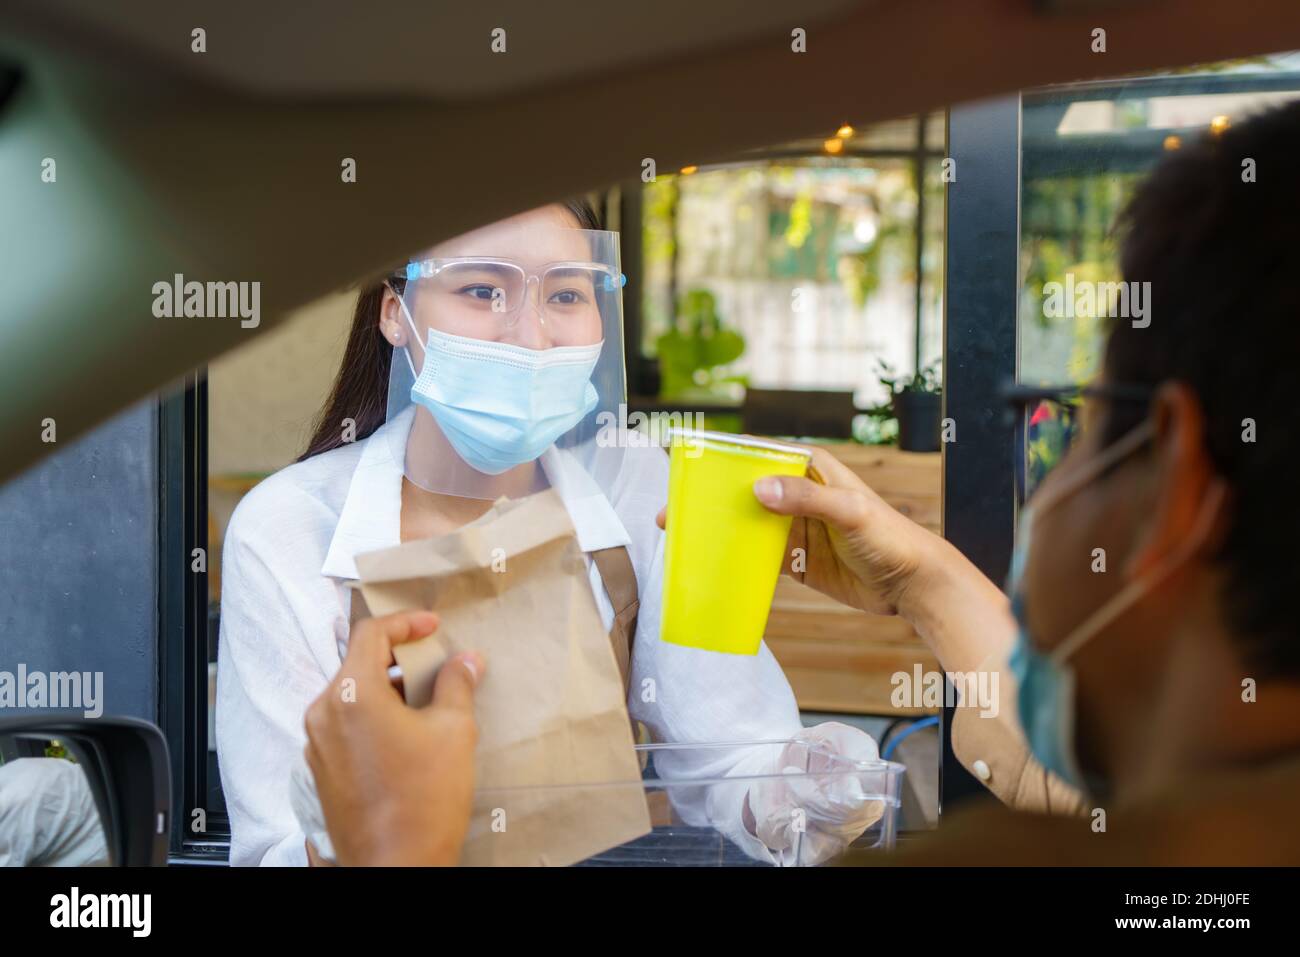 Asian man in protective mask taking food bag and coffee with woman waitress wearing face mask and face shield at drive thru during coronavirus outbrea Stock Photo